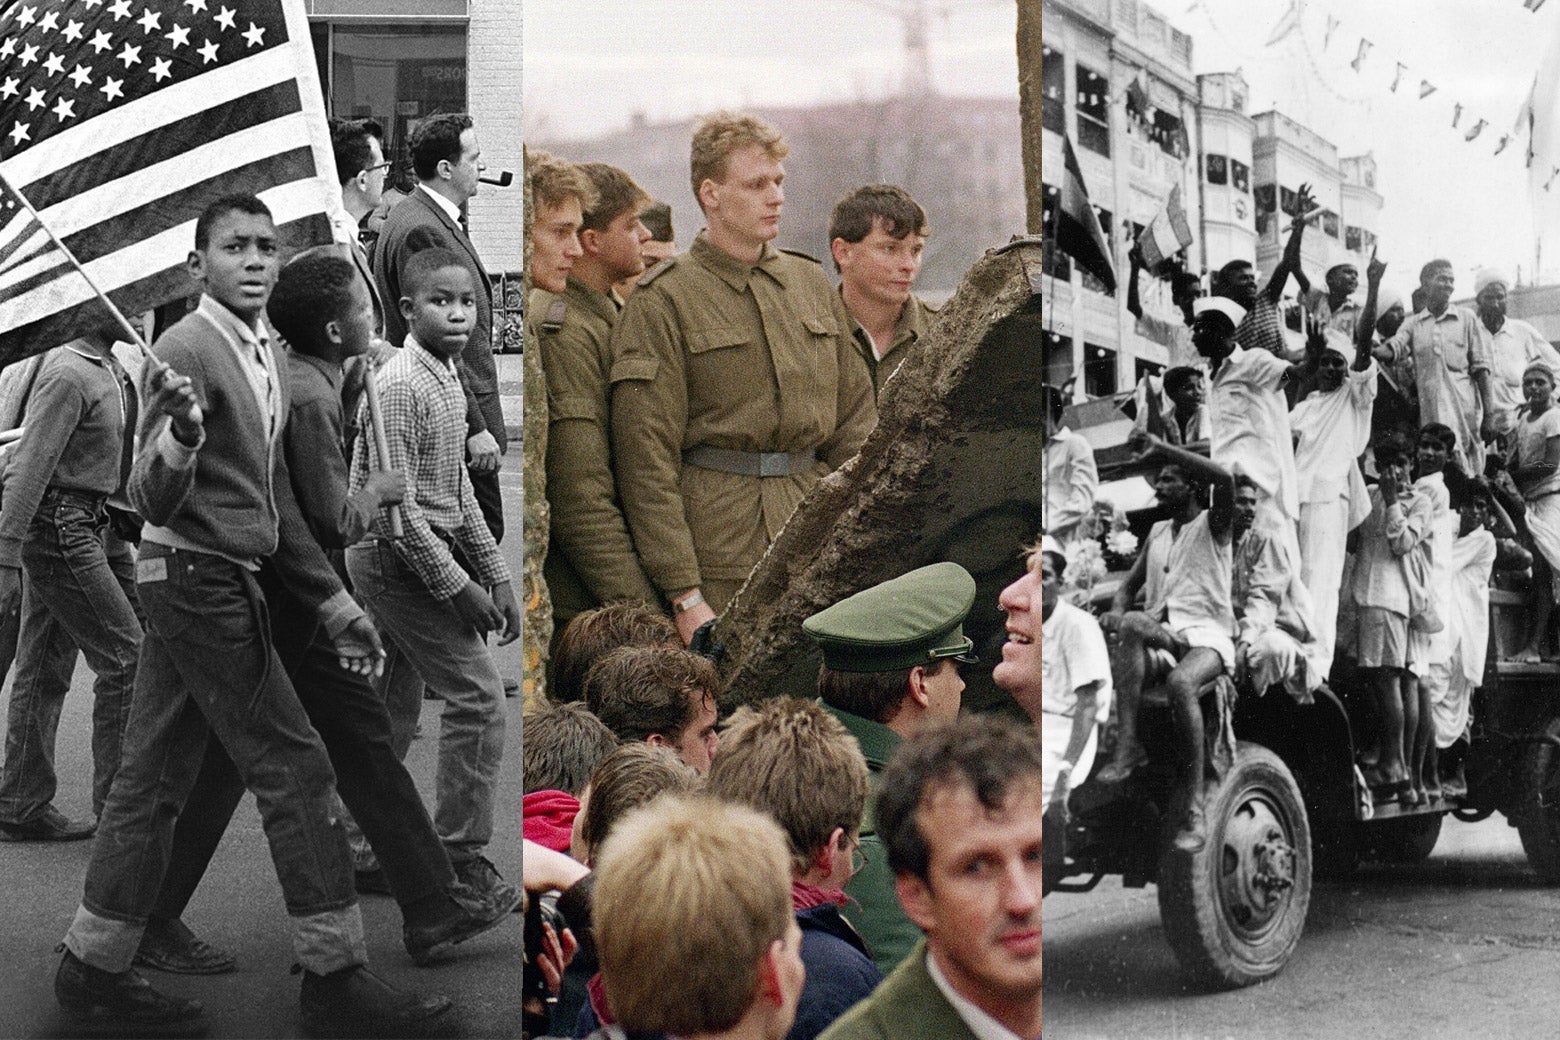 Three photos are shown side by side: A young kid walks with two other kids in a march, with two of them carrying American flags; soldiers and citizenry look at the fallen Berlin Wall; a group of Indians ride on a car and raise their fists.